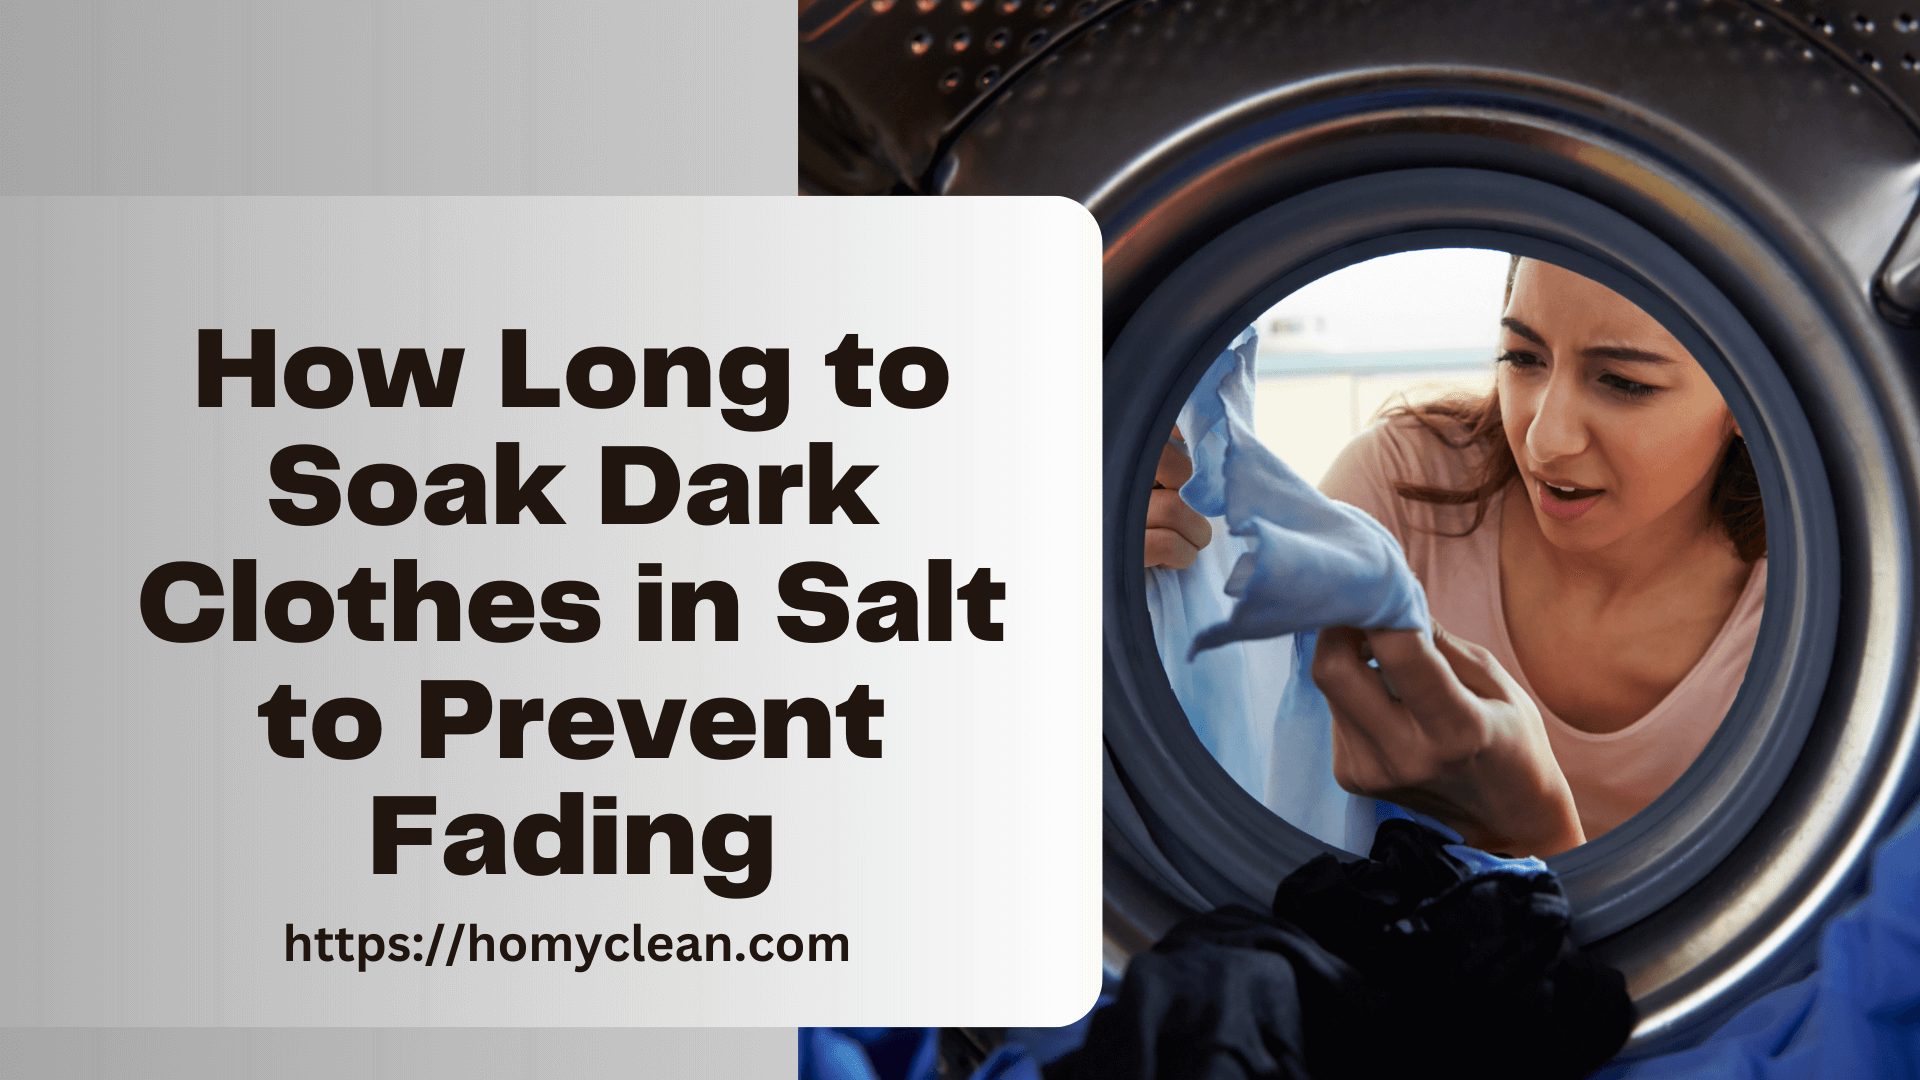 How Long to Soak Dark Clothes in Salt Water to Prevent Fading